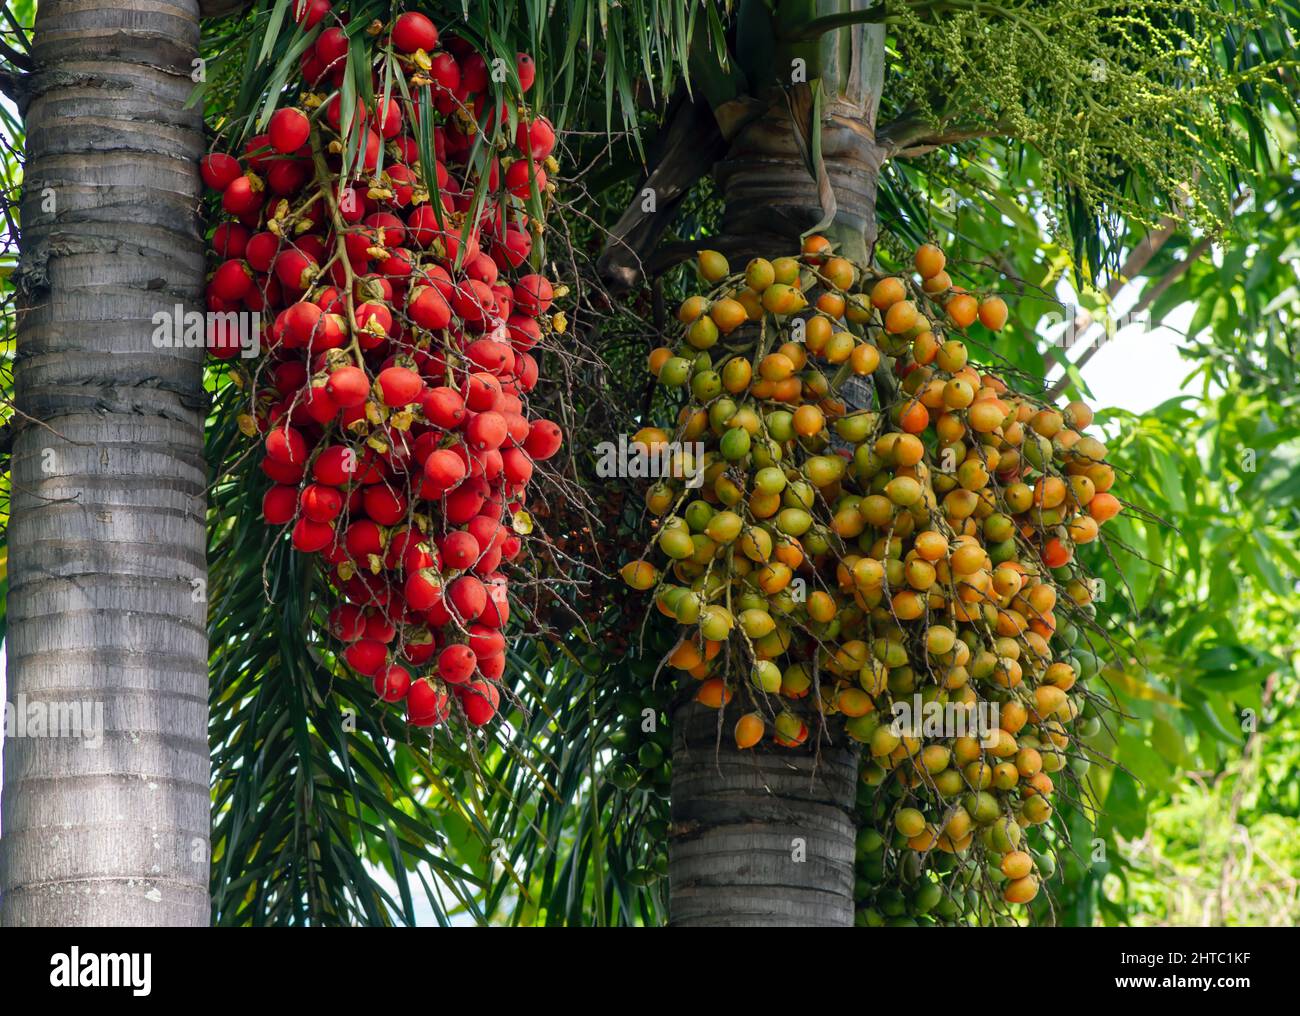 Red and brown Areca nut palm, Betel Nuts, Betel palm (Areca catechu) hanging on its tree Stock Photo